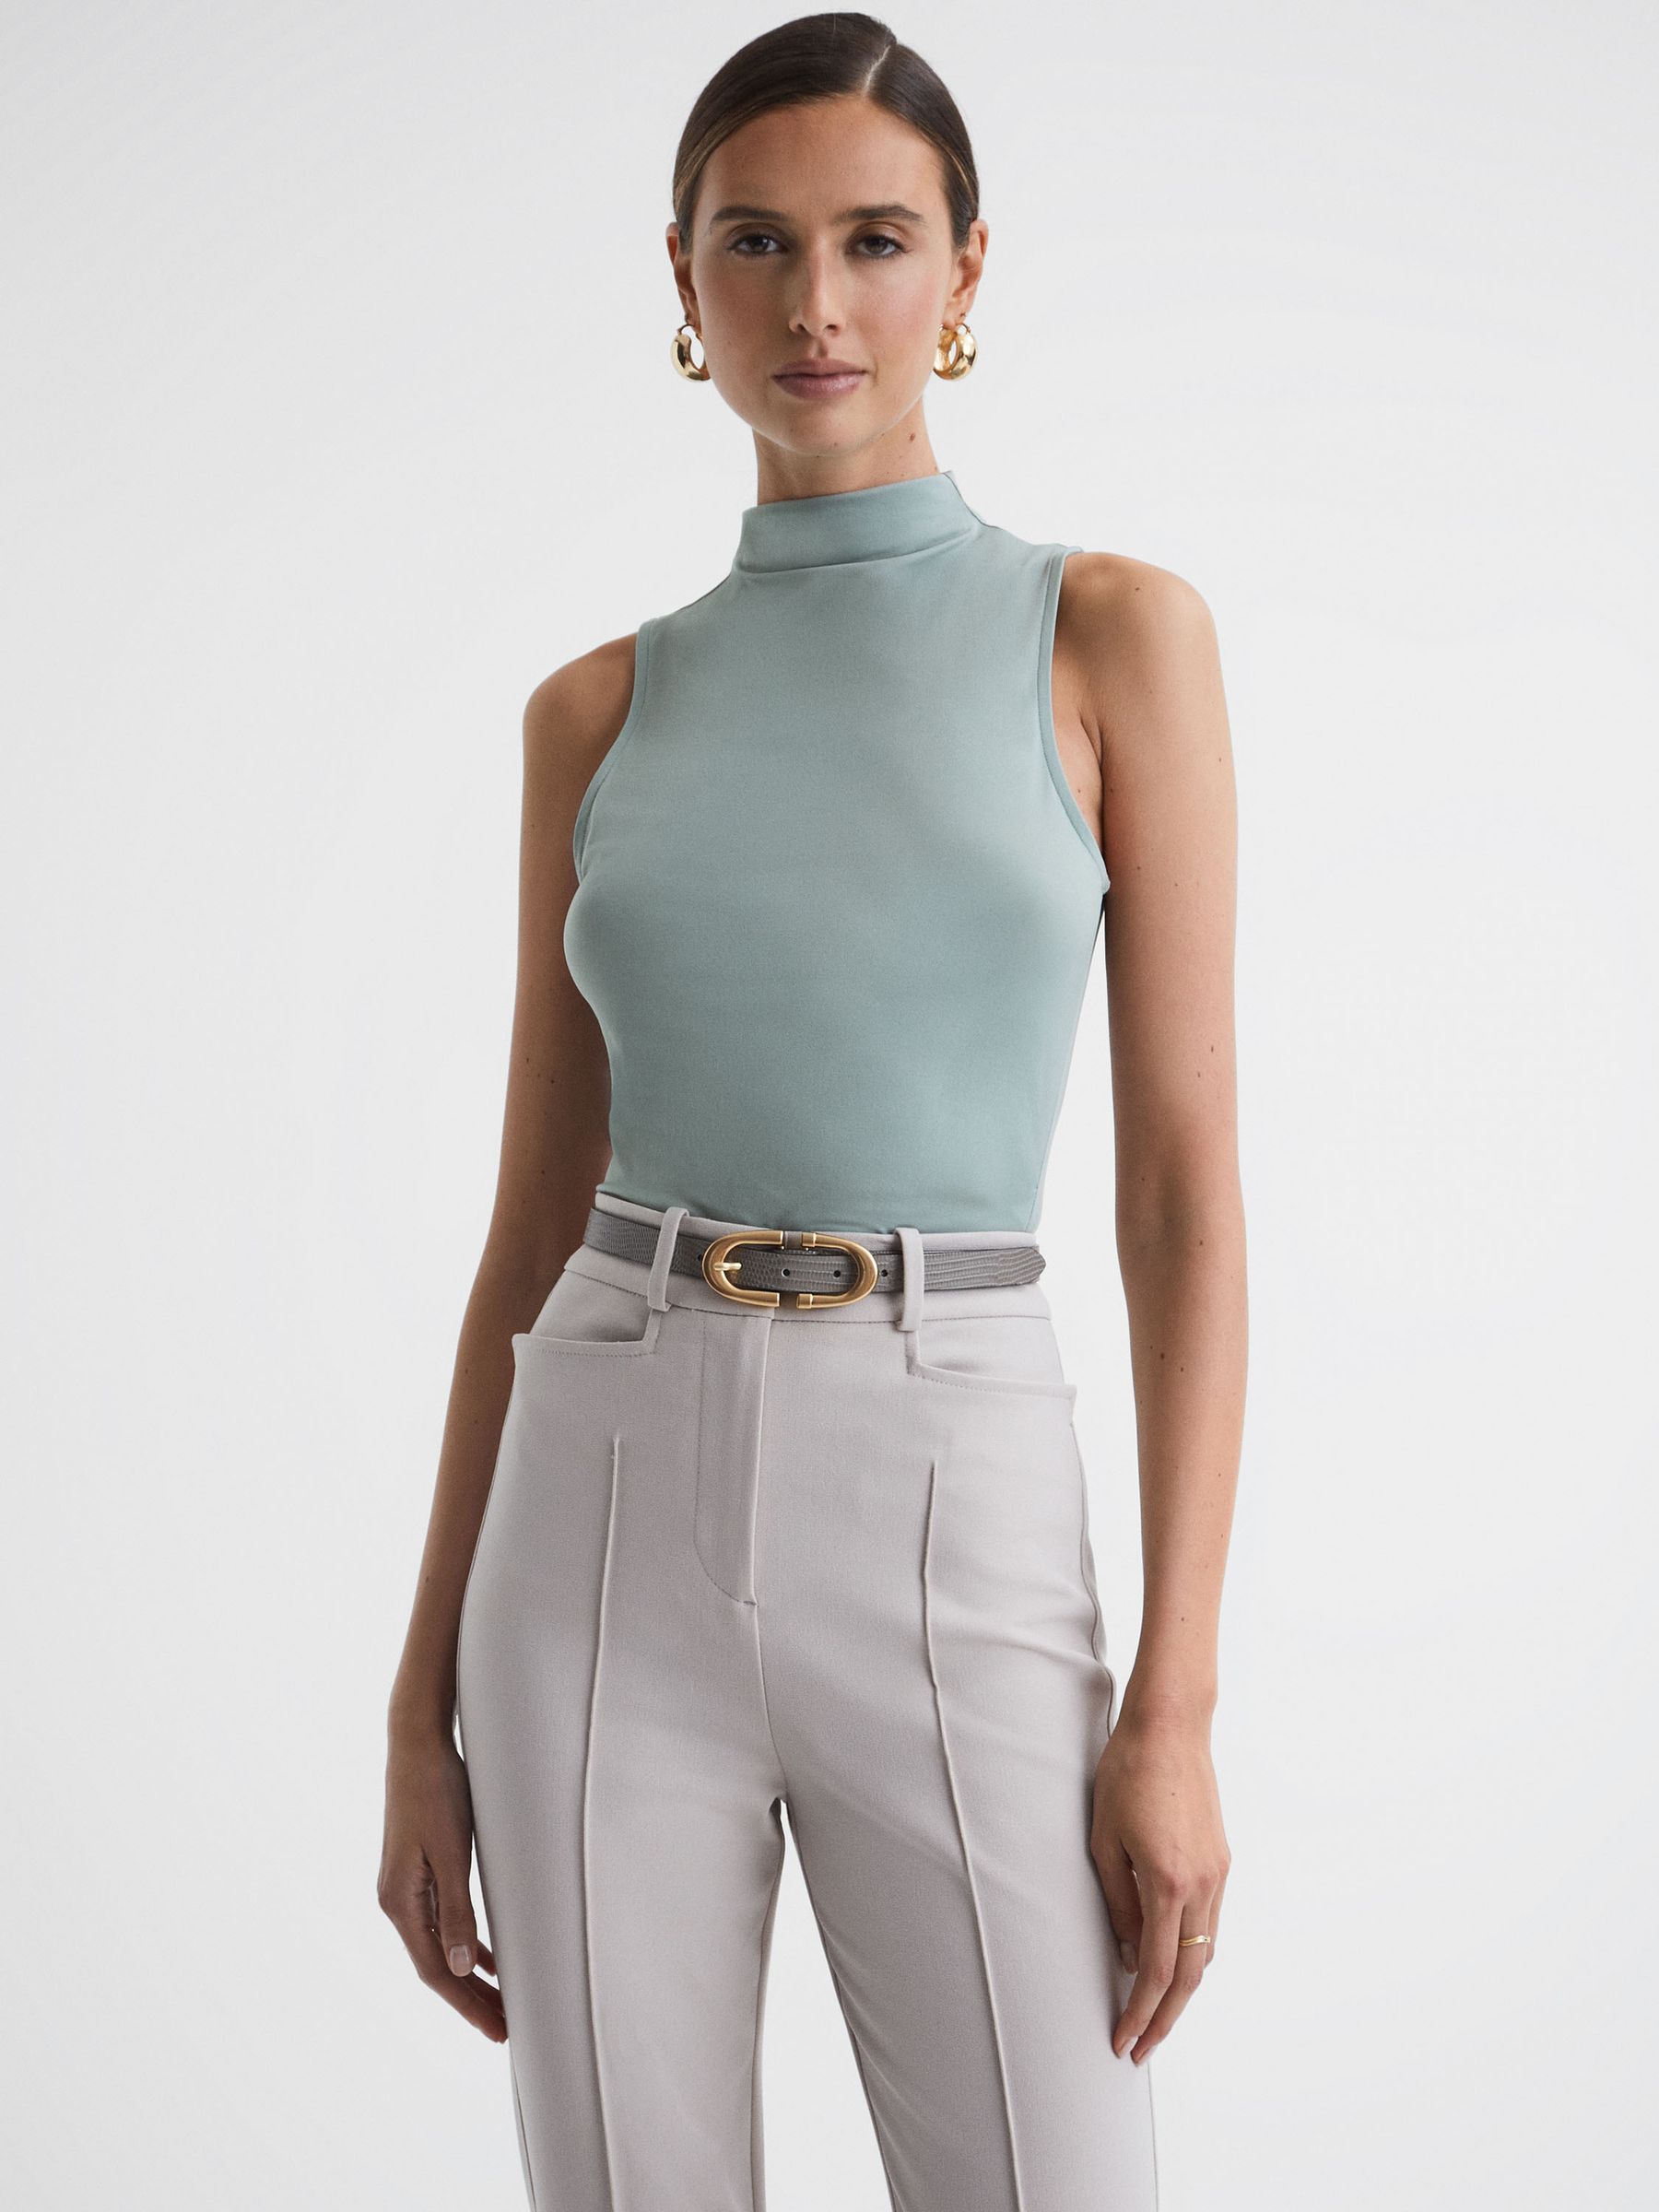 Reiss Bianca Fitted Ruched High-Neck Top - REISS